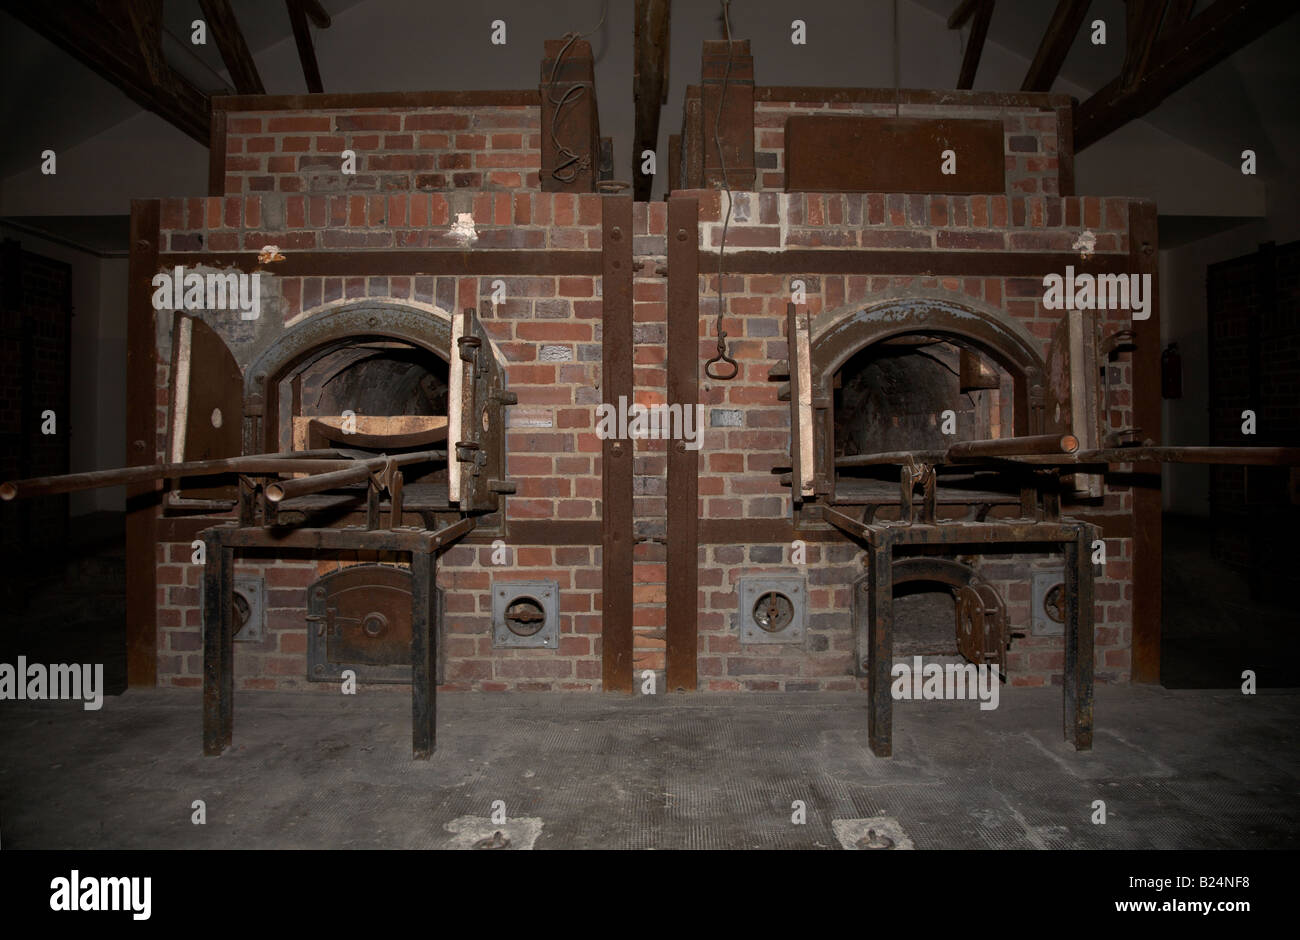 infamous crematorium ovens in Barrack X at dachau concentration camp used to incinerate the bodies of jews and other prisoners Stock Photo